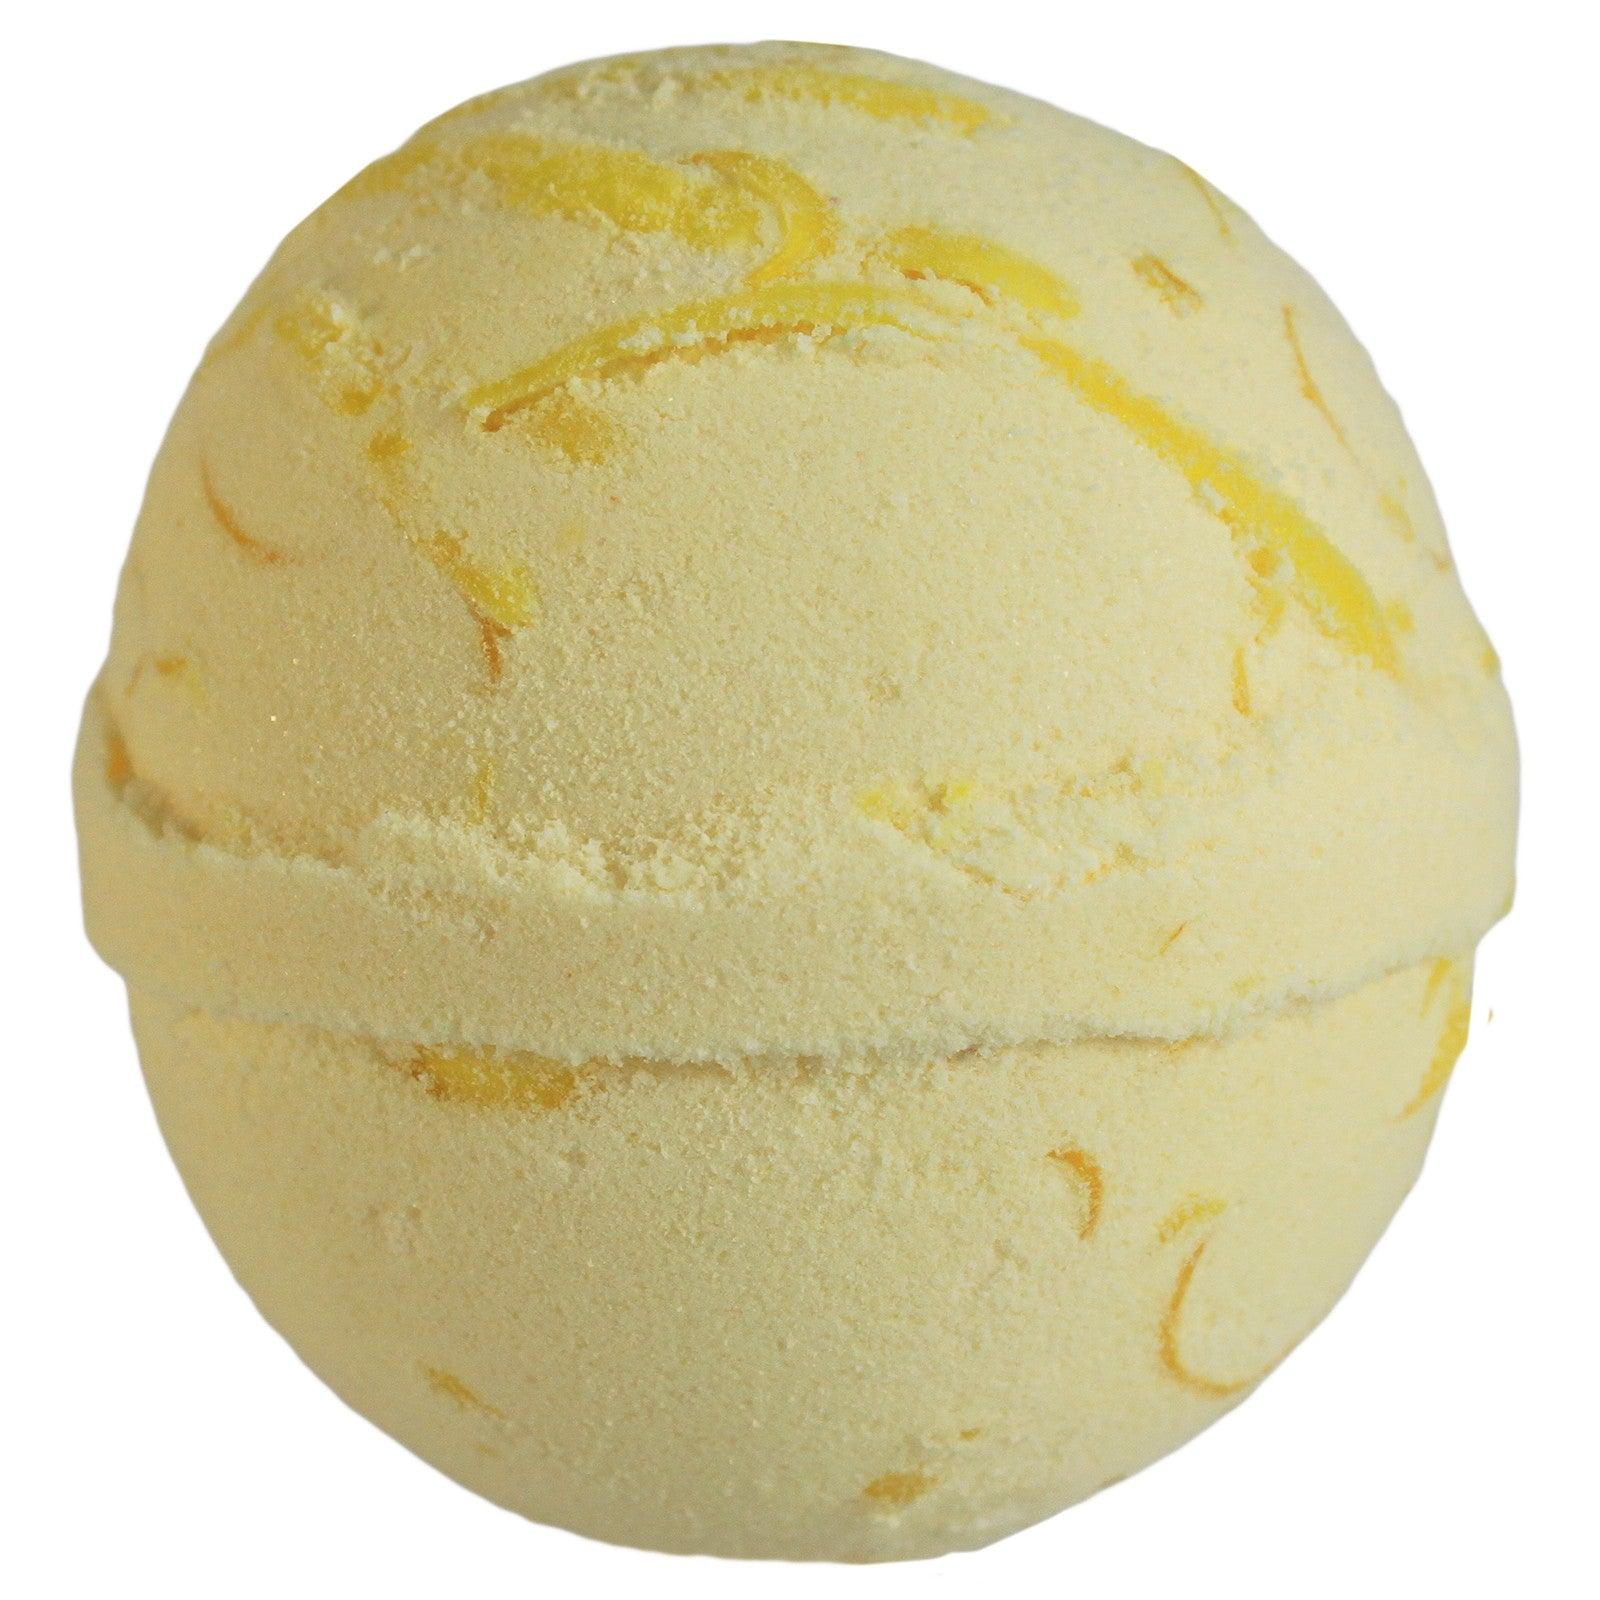 Tropical Paradise Coco Bath Bomb - Pineapple - DuvetDay.co.uk